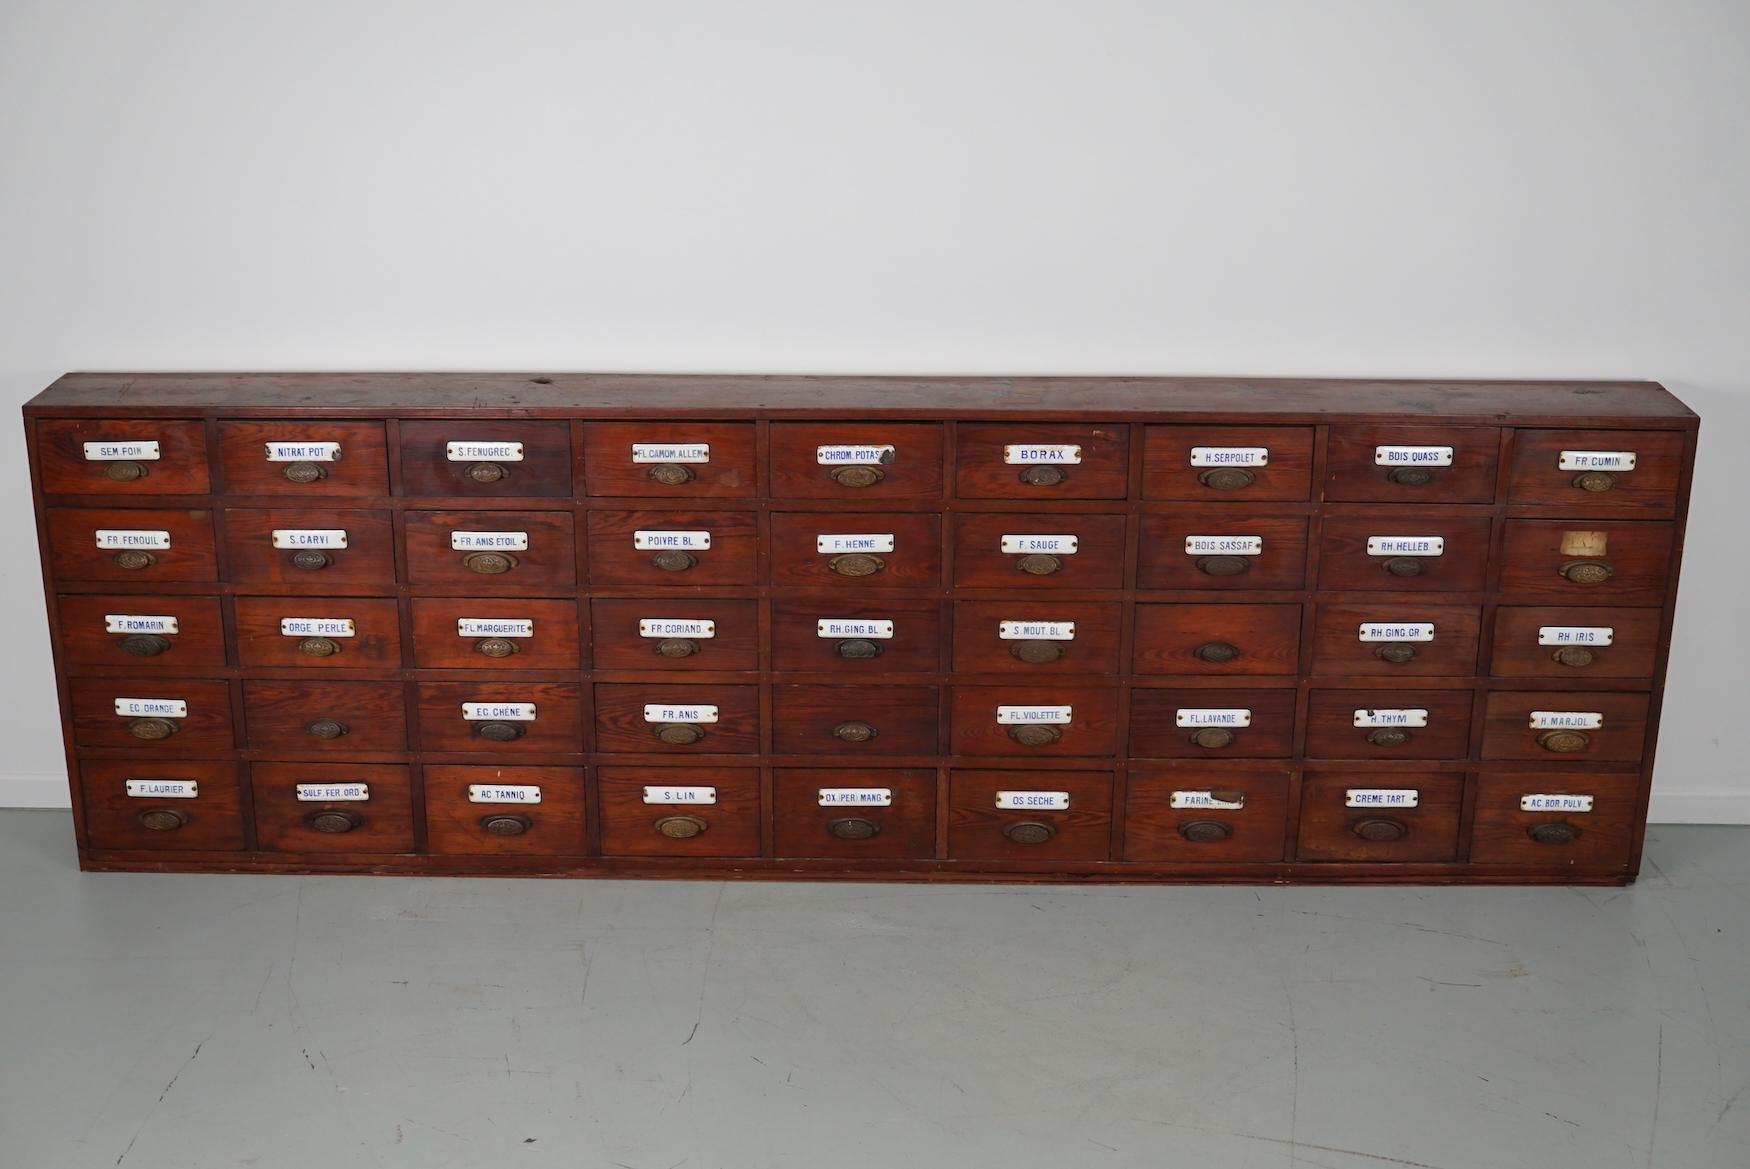  Large Antique Belgian Pitch Pine Apothecary Cabinet with Enamel Shields, 1900s For Sale 4